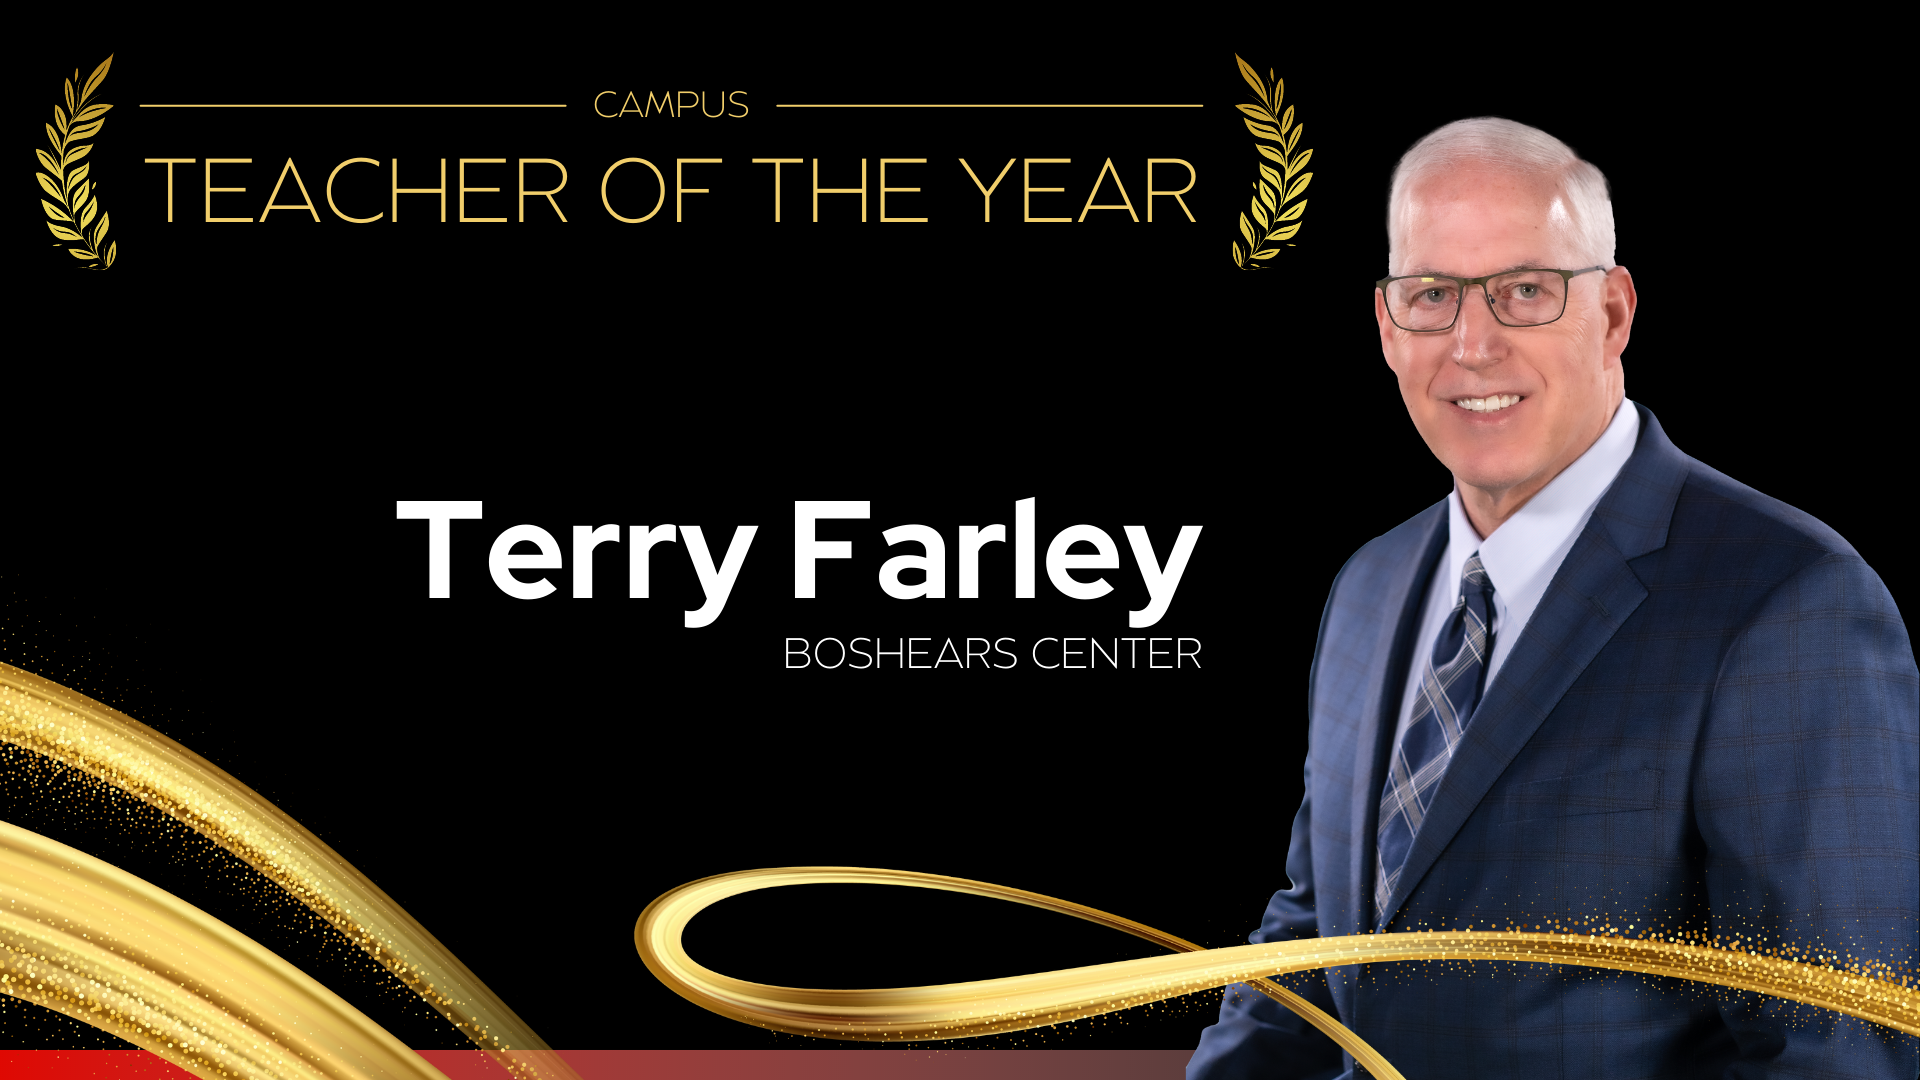 Campus Teacher of the Year Wayne D. Boshears Center for Exceptional Programs - Terry Farley 